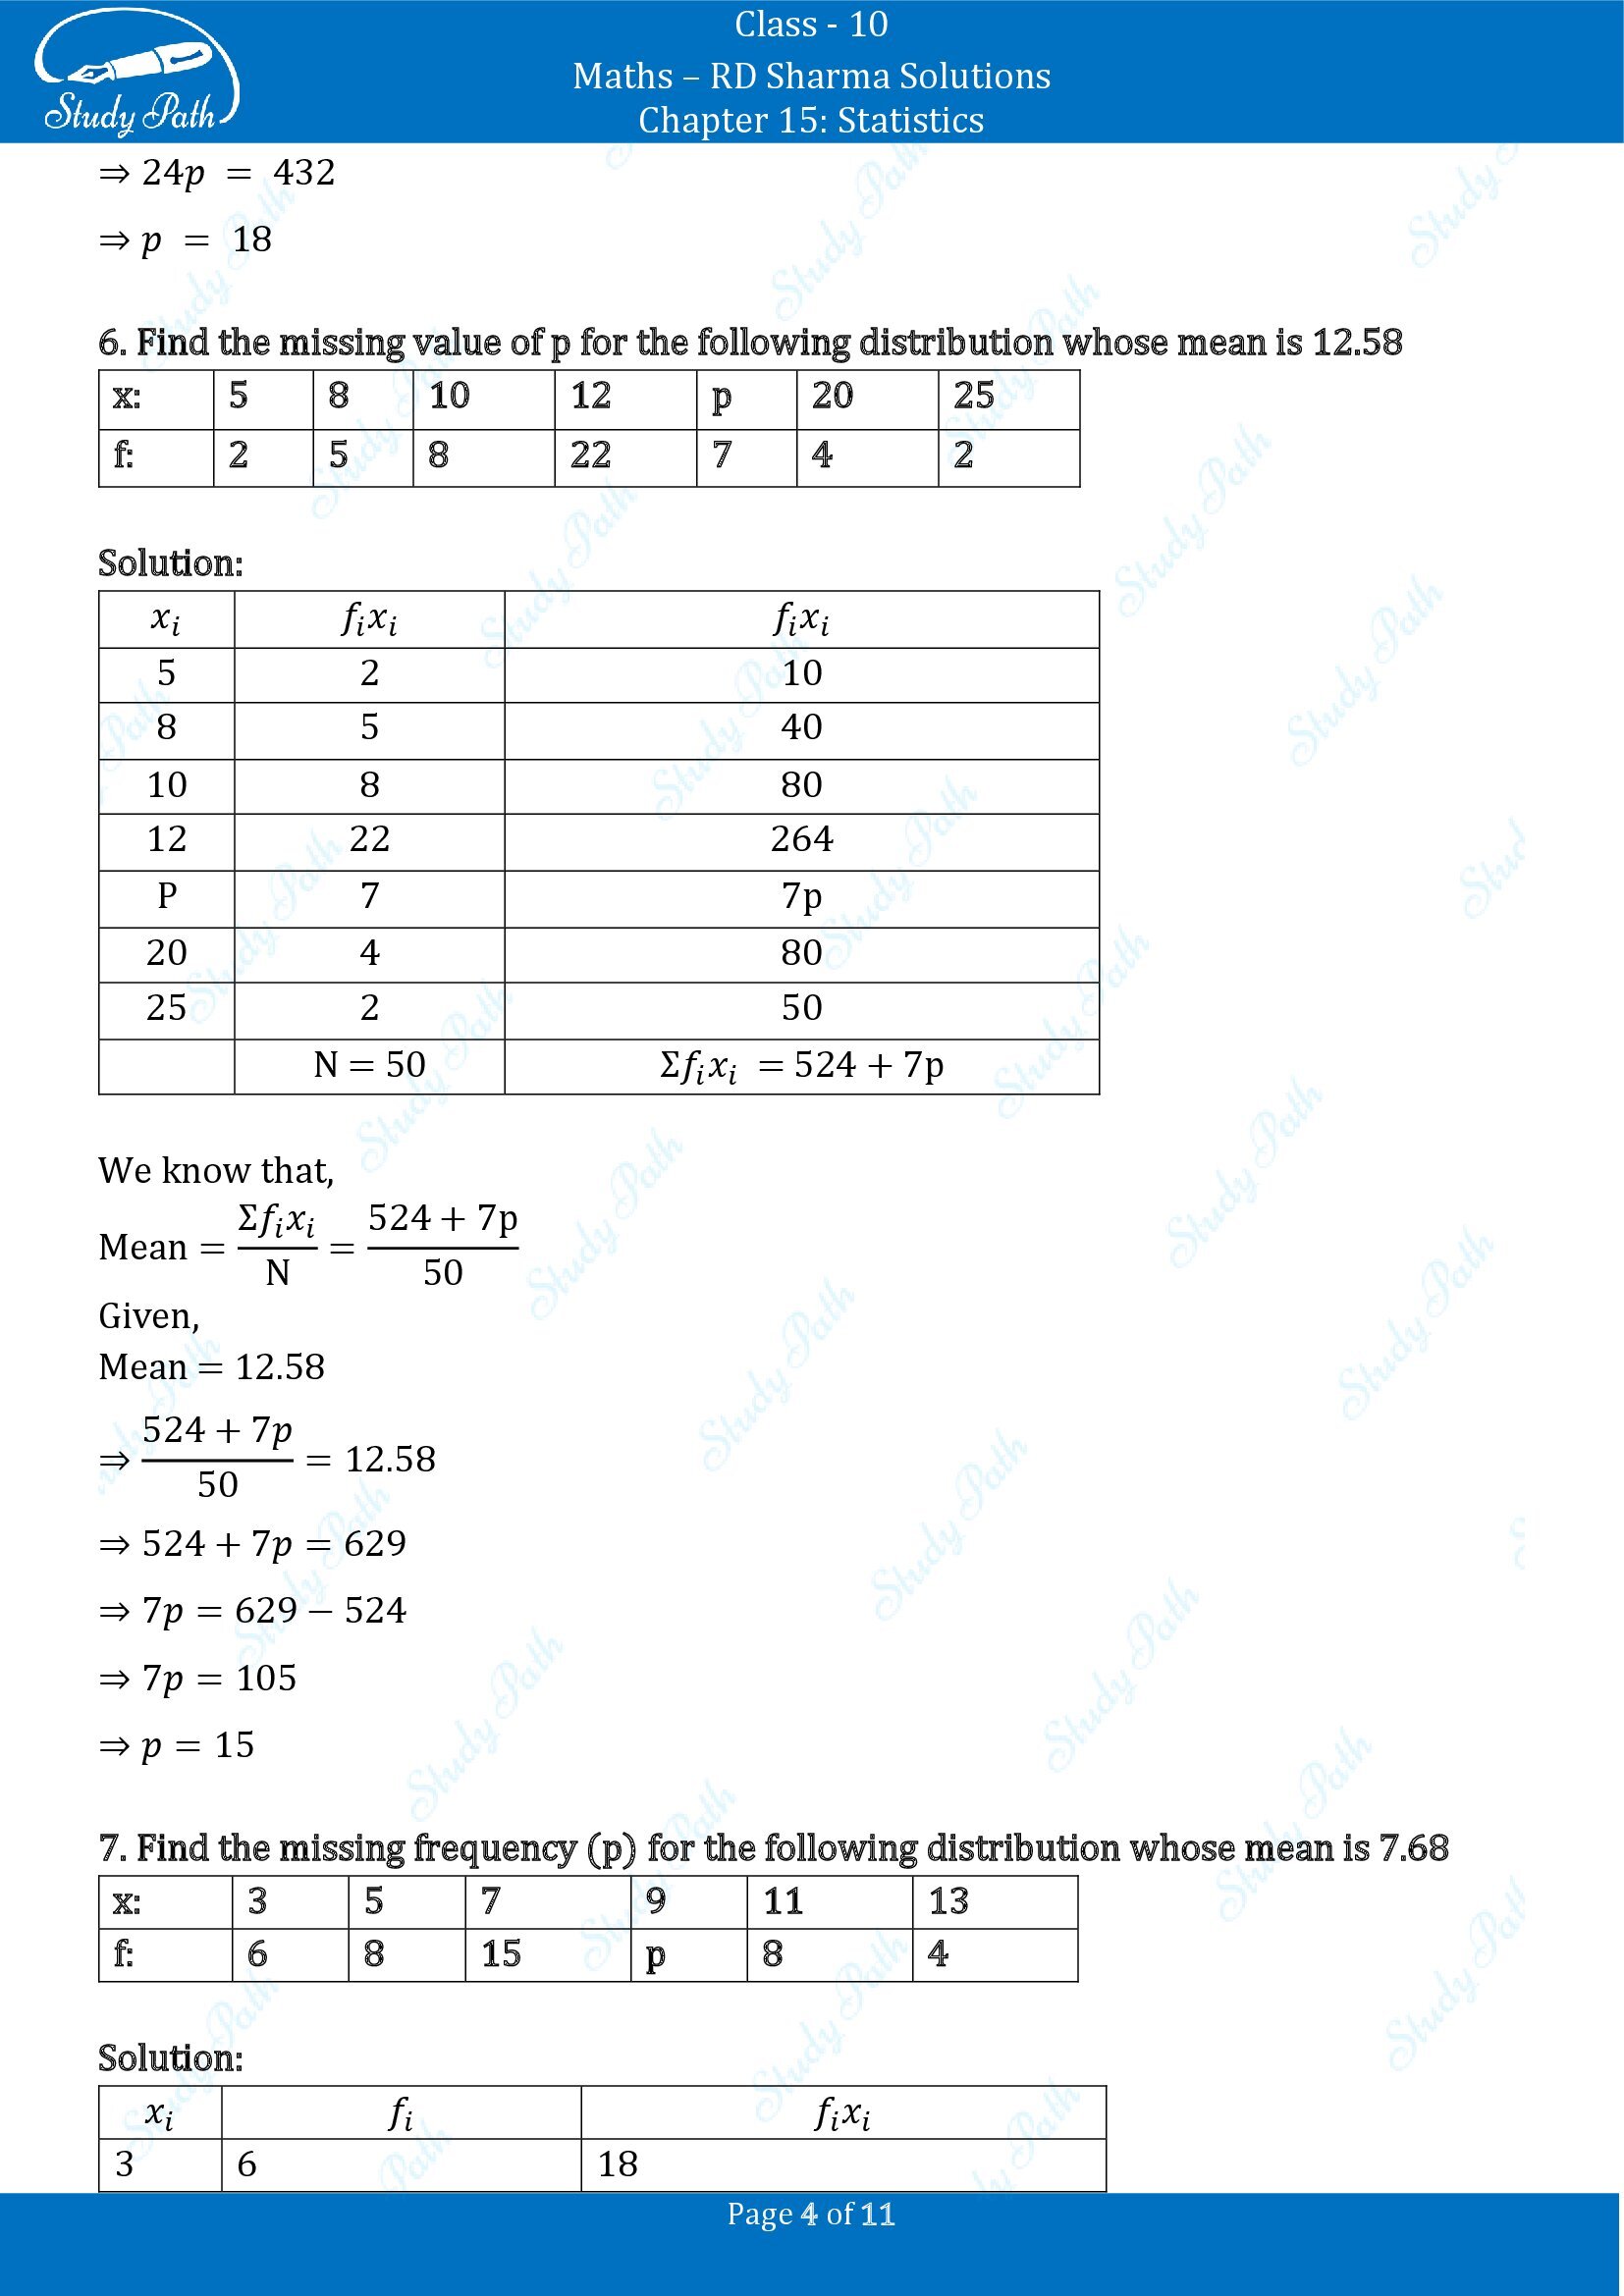 RD Sharma Solutions Class 10 Chapter 15 Statistics Exercise 15.1 00004